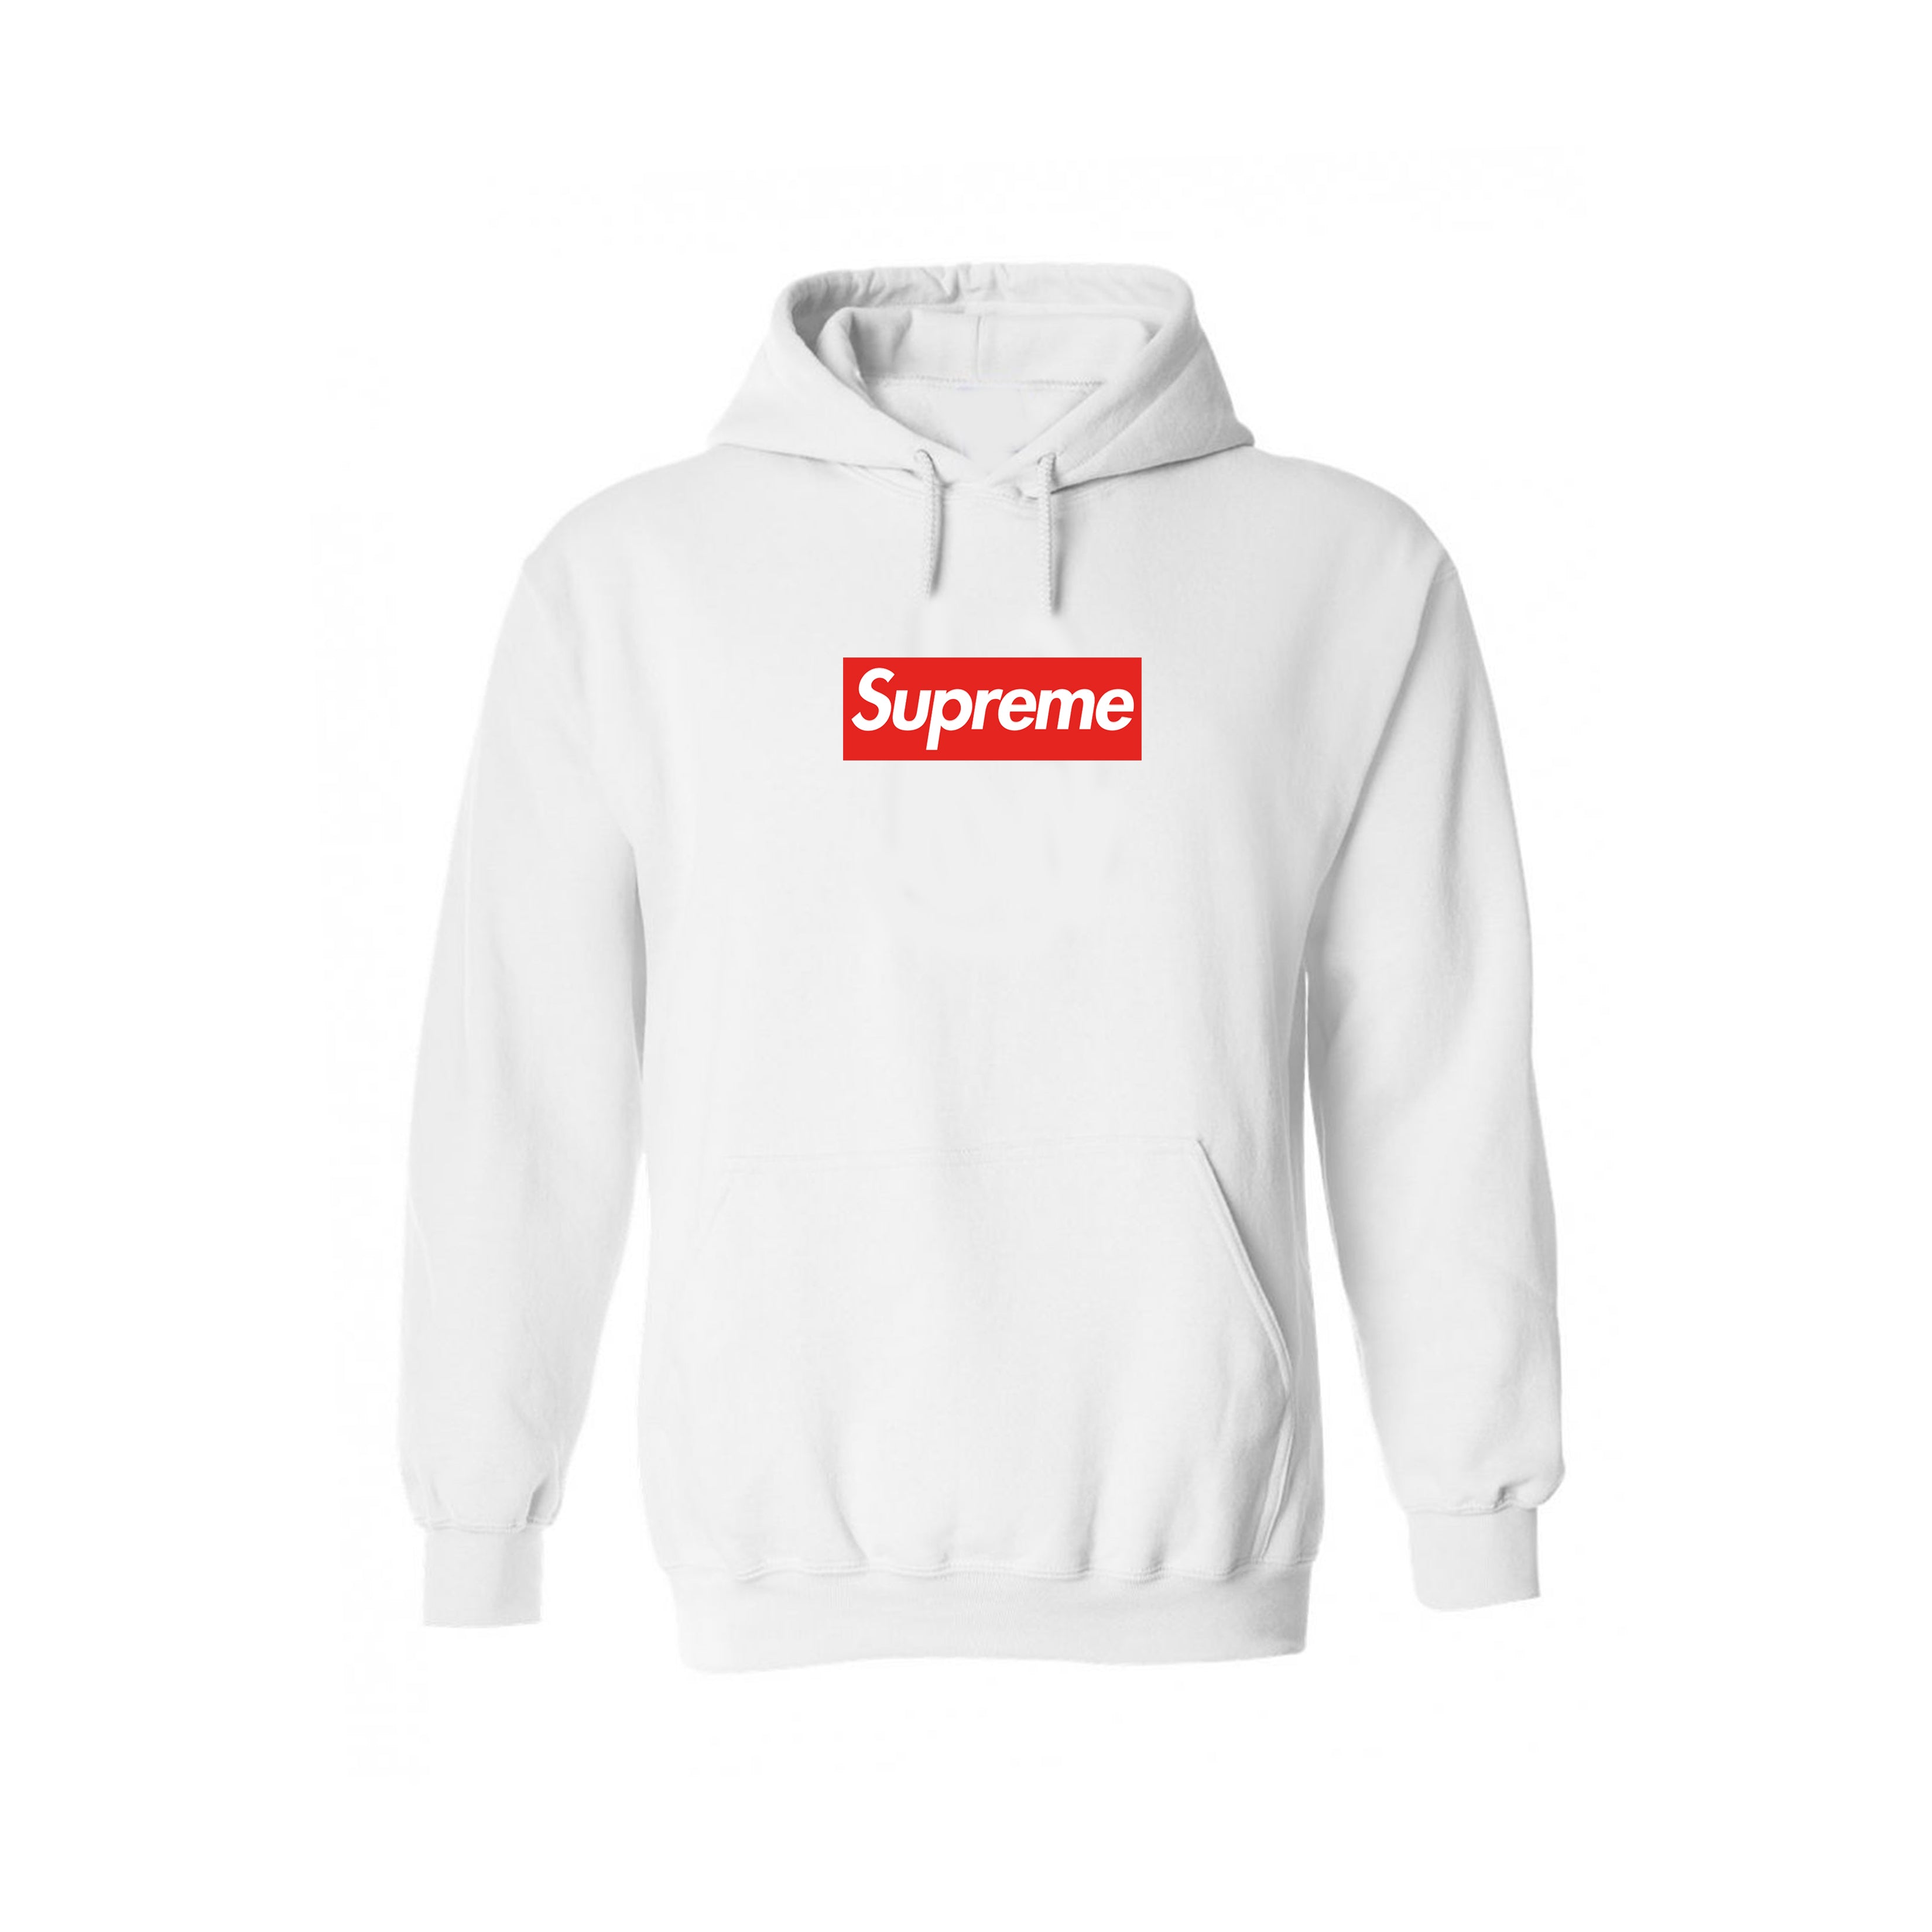 Supreme Clothing & Accessories  Shop Supreme Hoodies, Bags & More